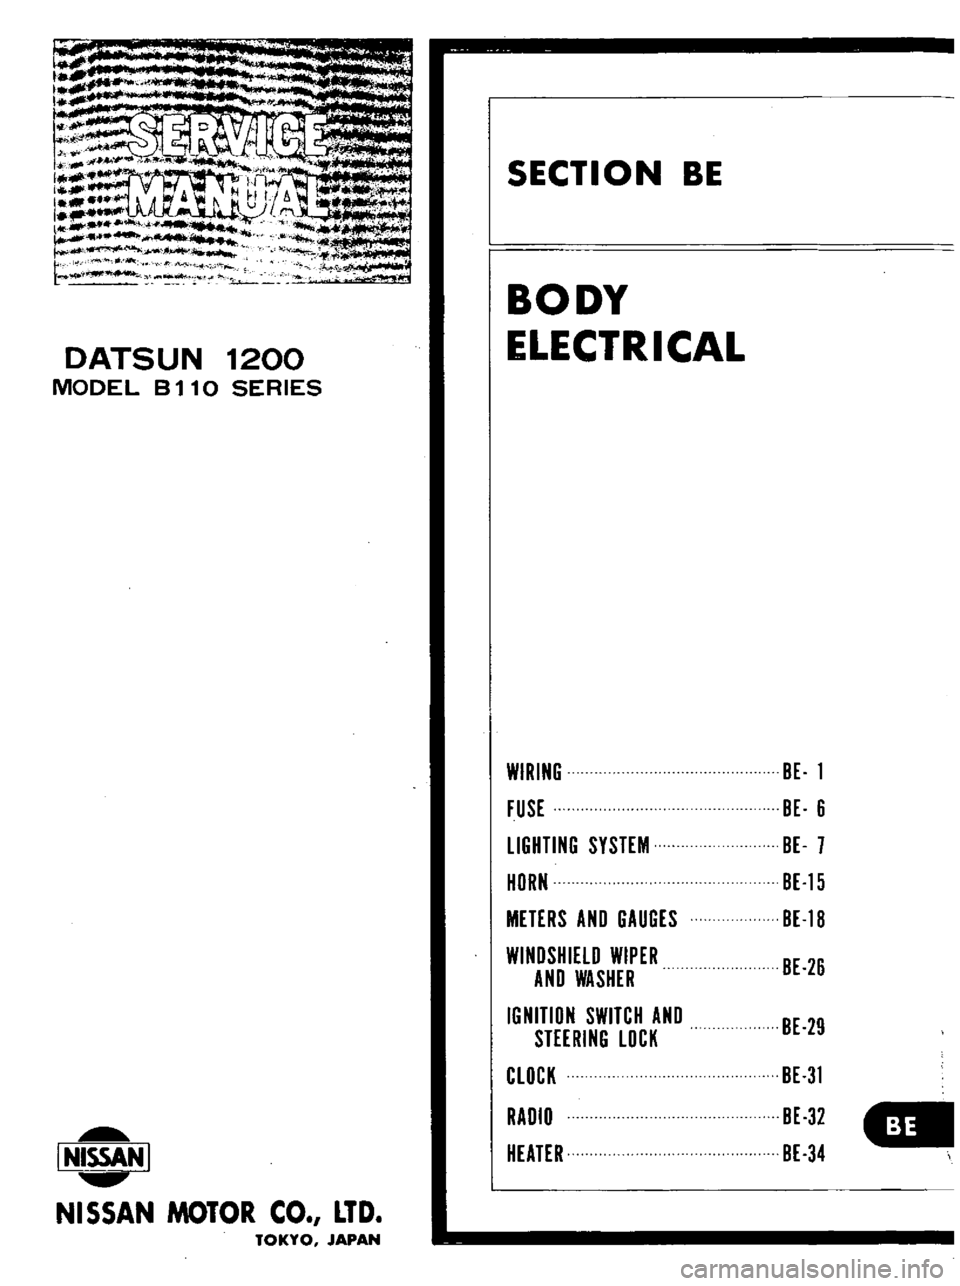 DATSUN B110 1973  Service Owners Guide 
DATSUN 
1200

MODEL 
B 
11 
0

SERIES

I 
NISSAN

I

NISSAN 
MOTOR 
CO 
LTD

TOKYO 
JAPAN 
SECTION 
BE

BODY

ELECTRICAL

WIRING

FUSE

LIGHTING 
SYSTEM

HORN

METERS 
AND

GAUGES

WINDSHIELD 
WIPER
